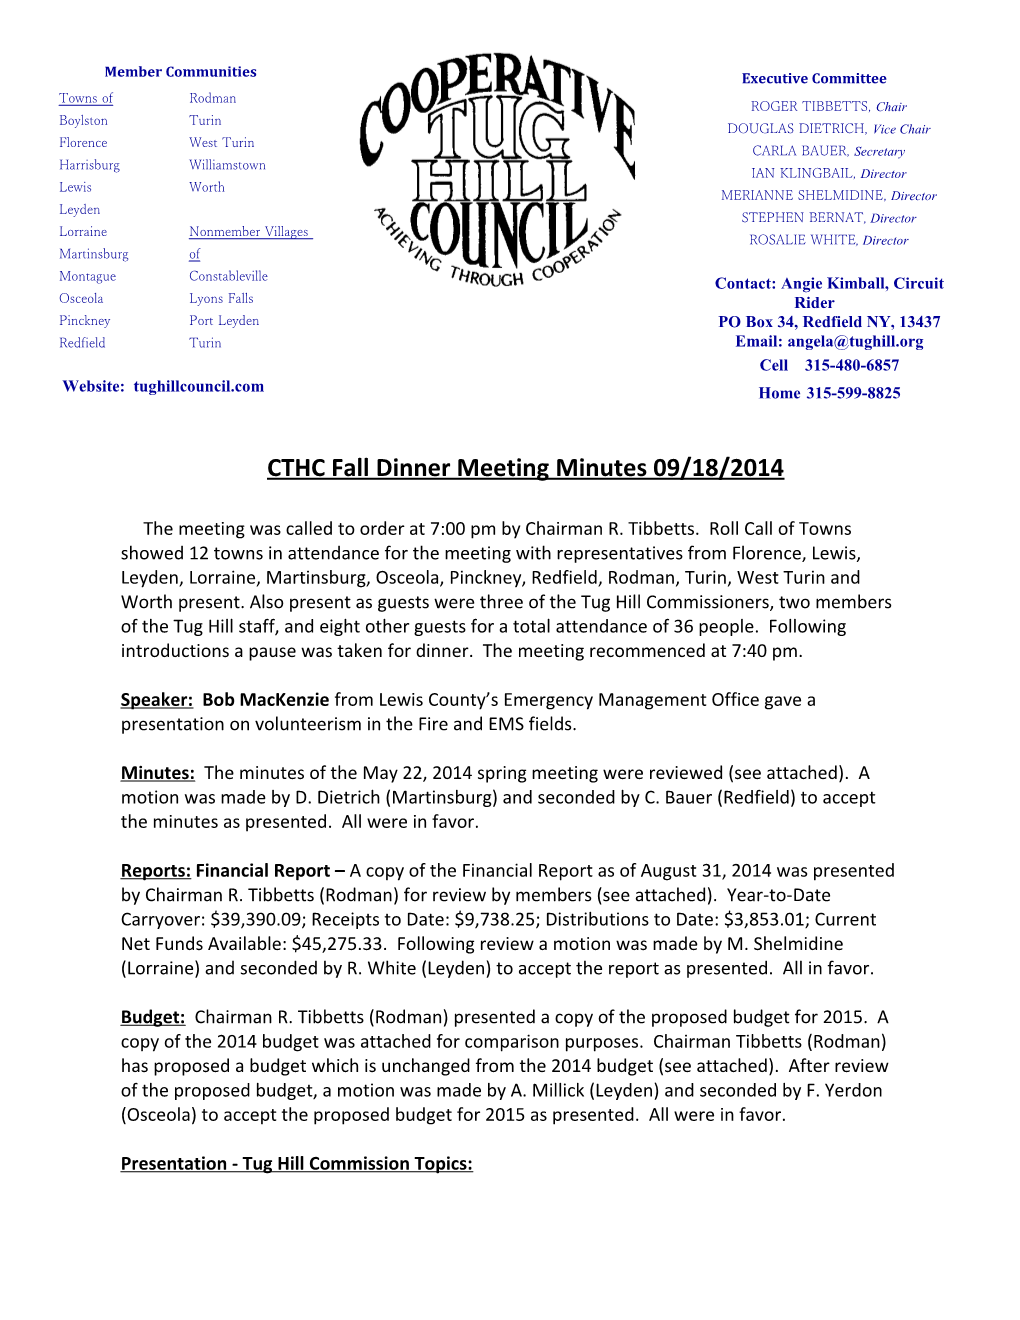 CTHC Fall Dinner Meeting Minutes 09/18/2014